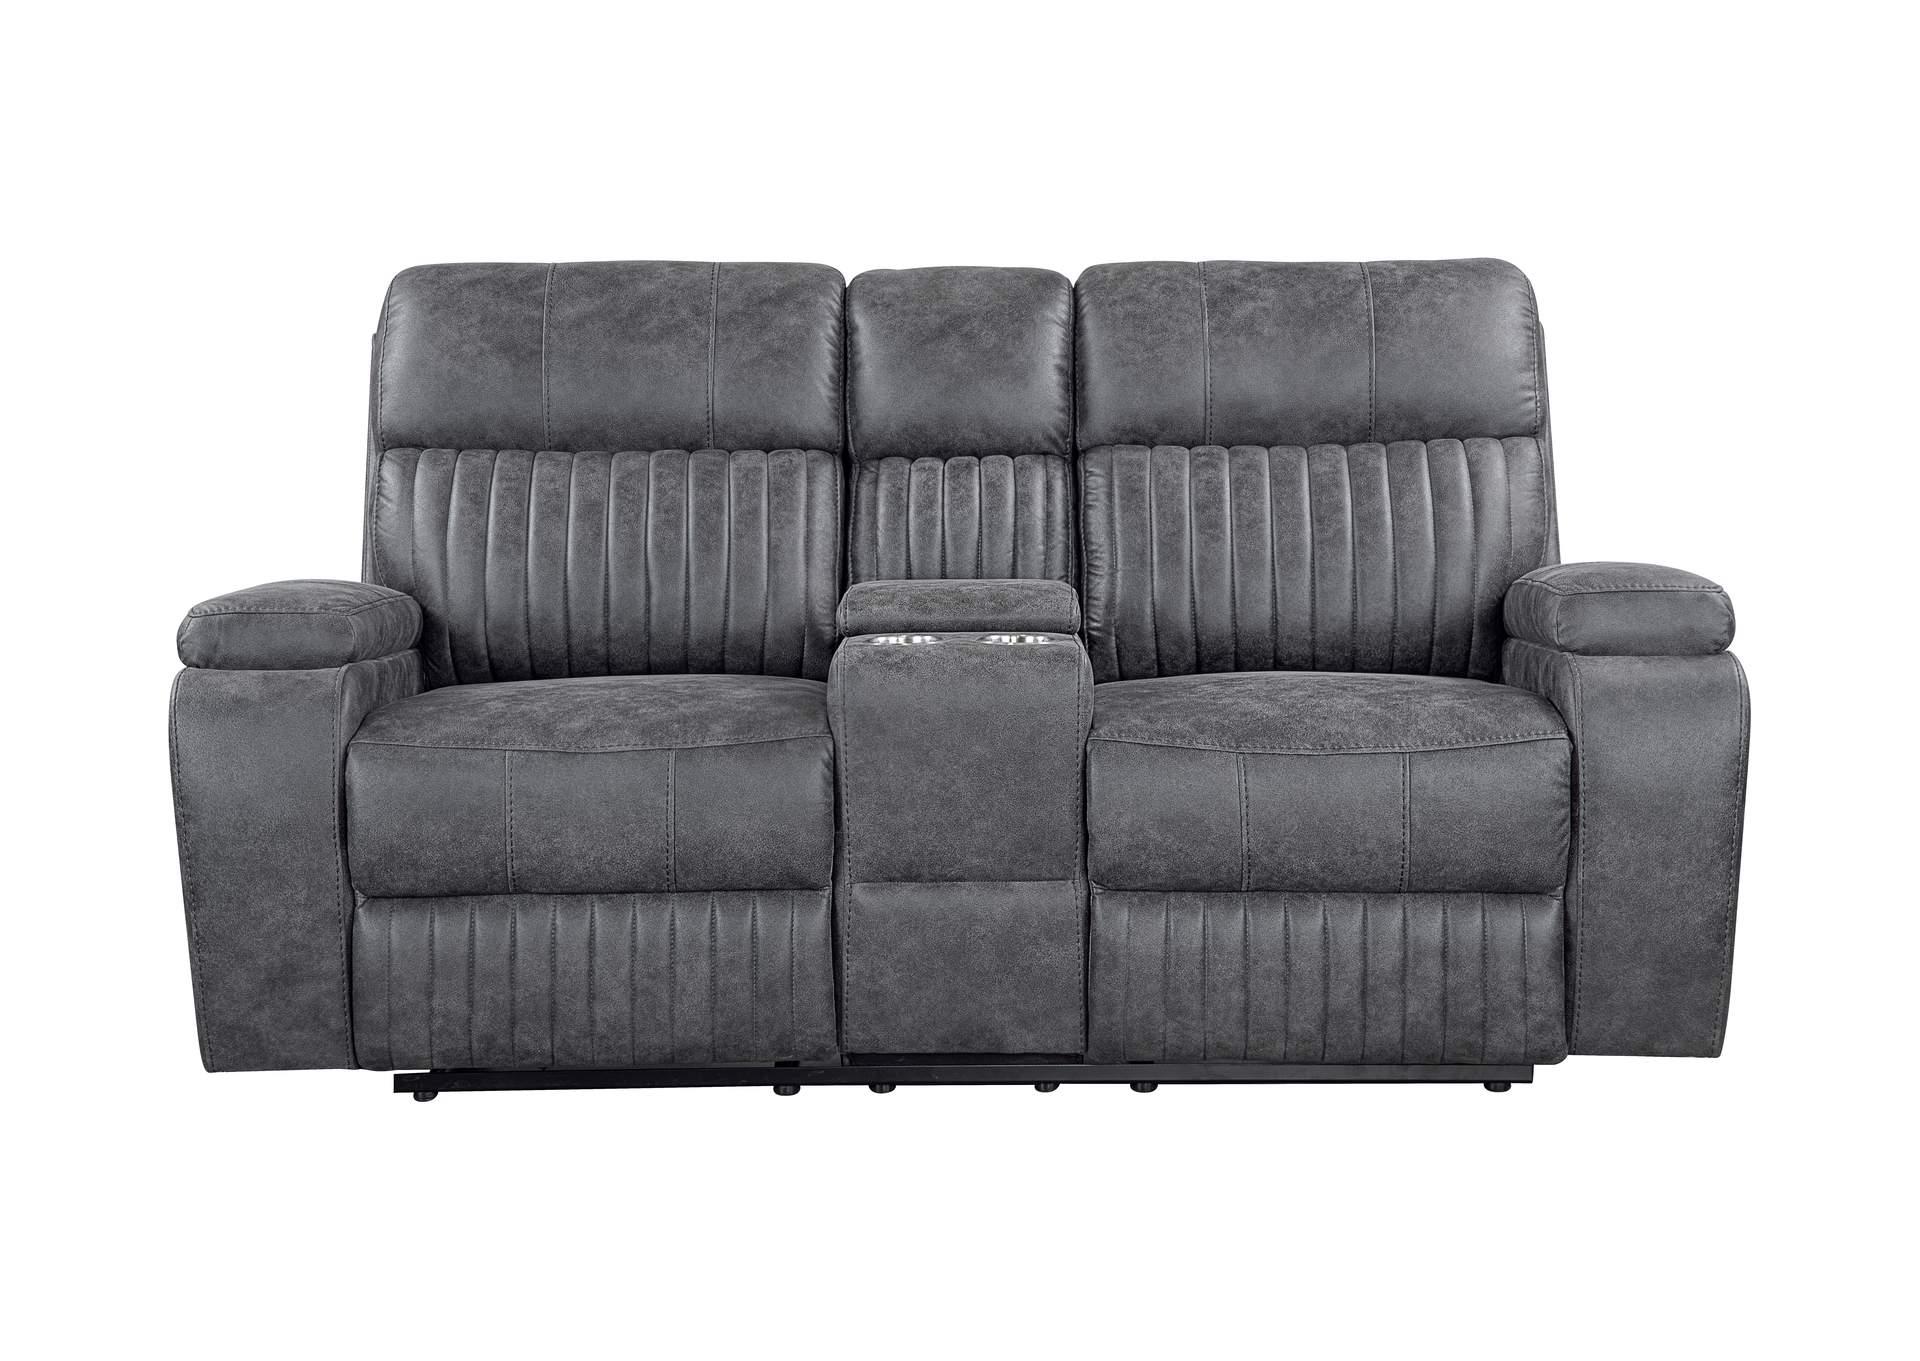 Lane Furniture Dual Reclining Sofa in Gray Fabric and Dual Reclining Love Seat with Storage Console